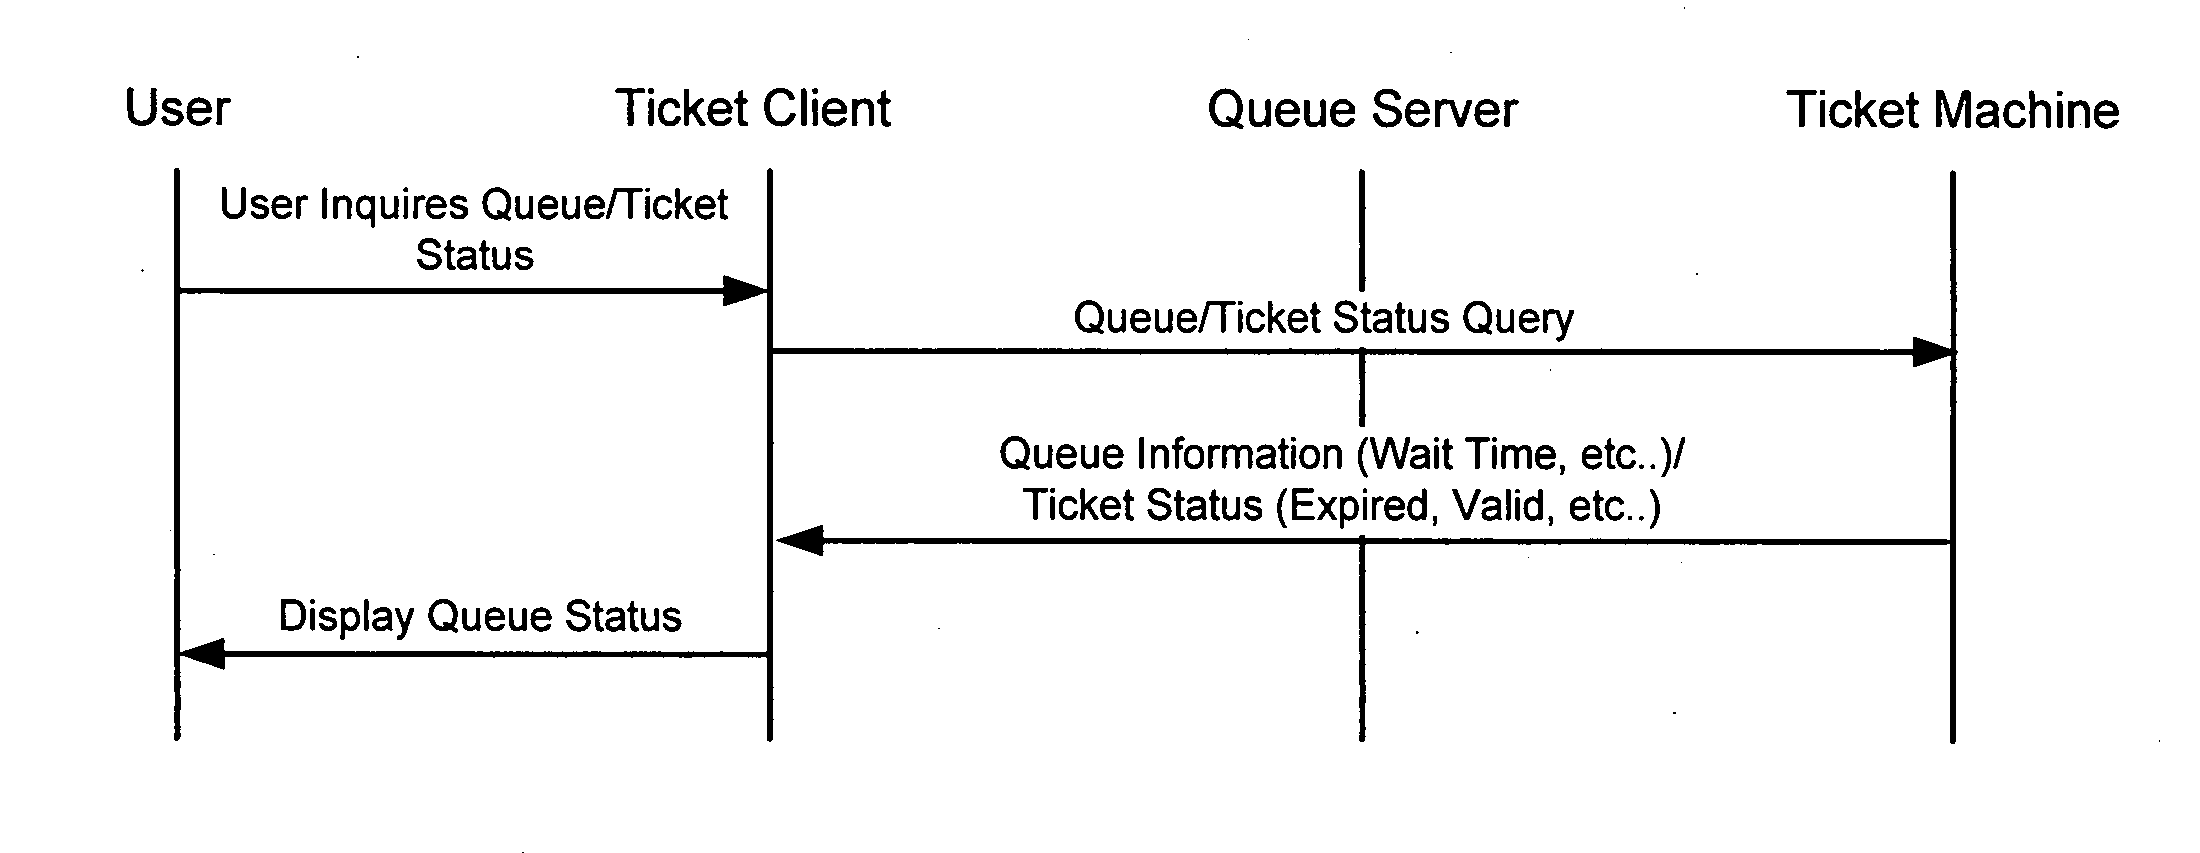 Validation of queue tickets in wireless communications terminals by near-field communicatons with ticket machines